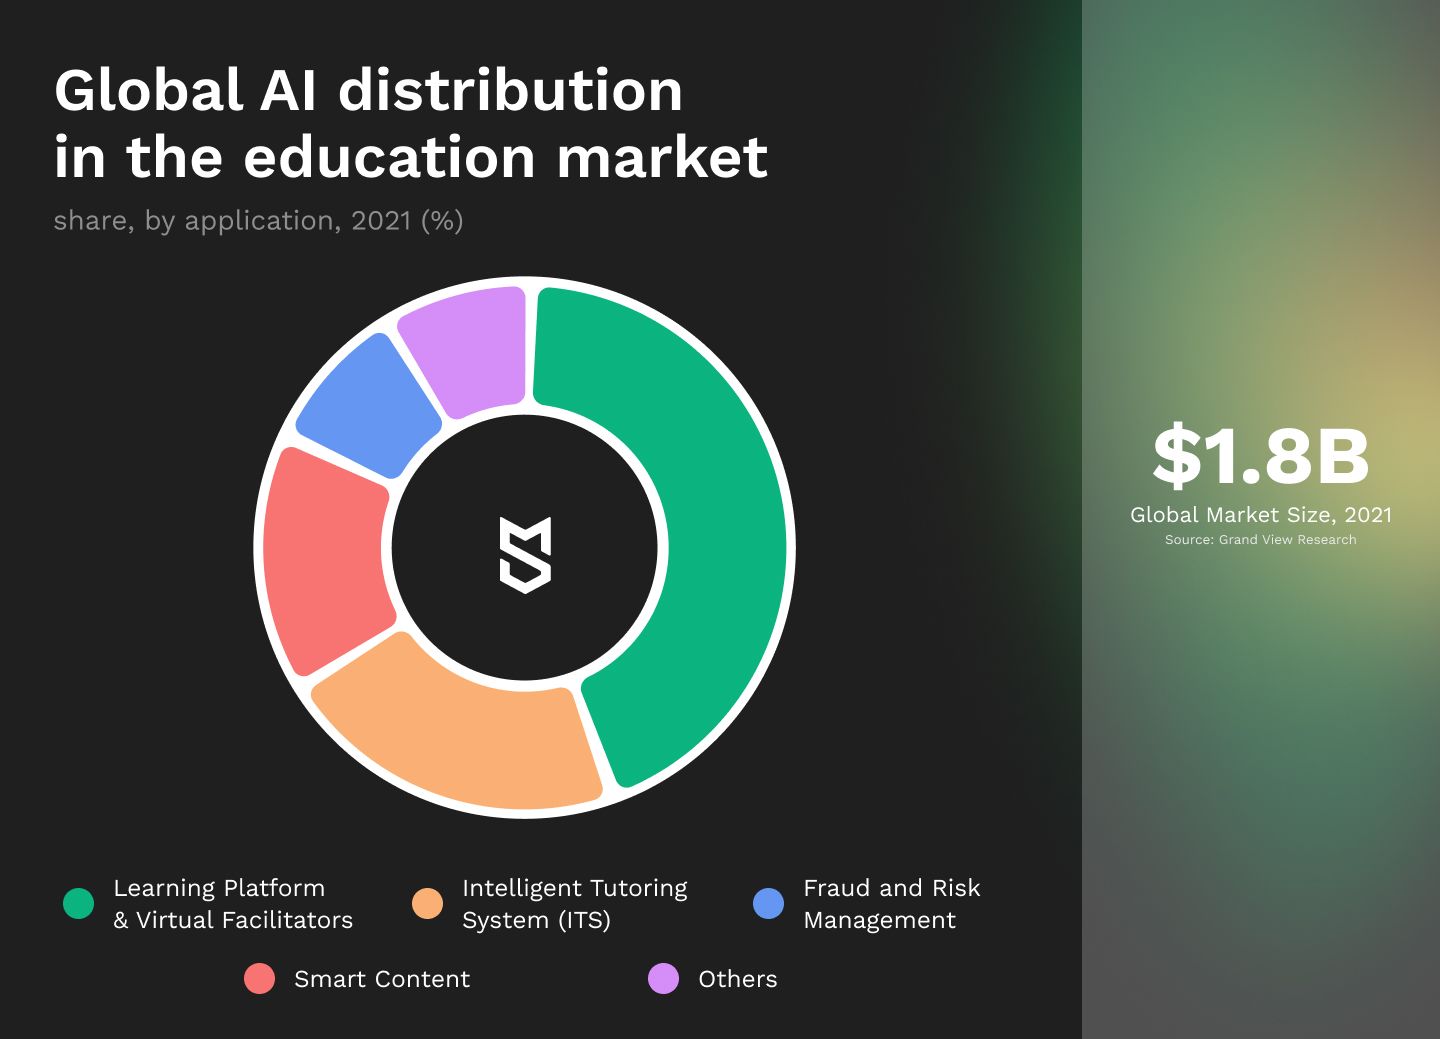 Global AI distribution in the education market, statistics by Grand View Research 